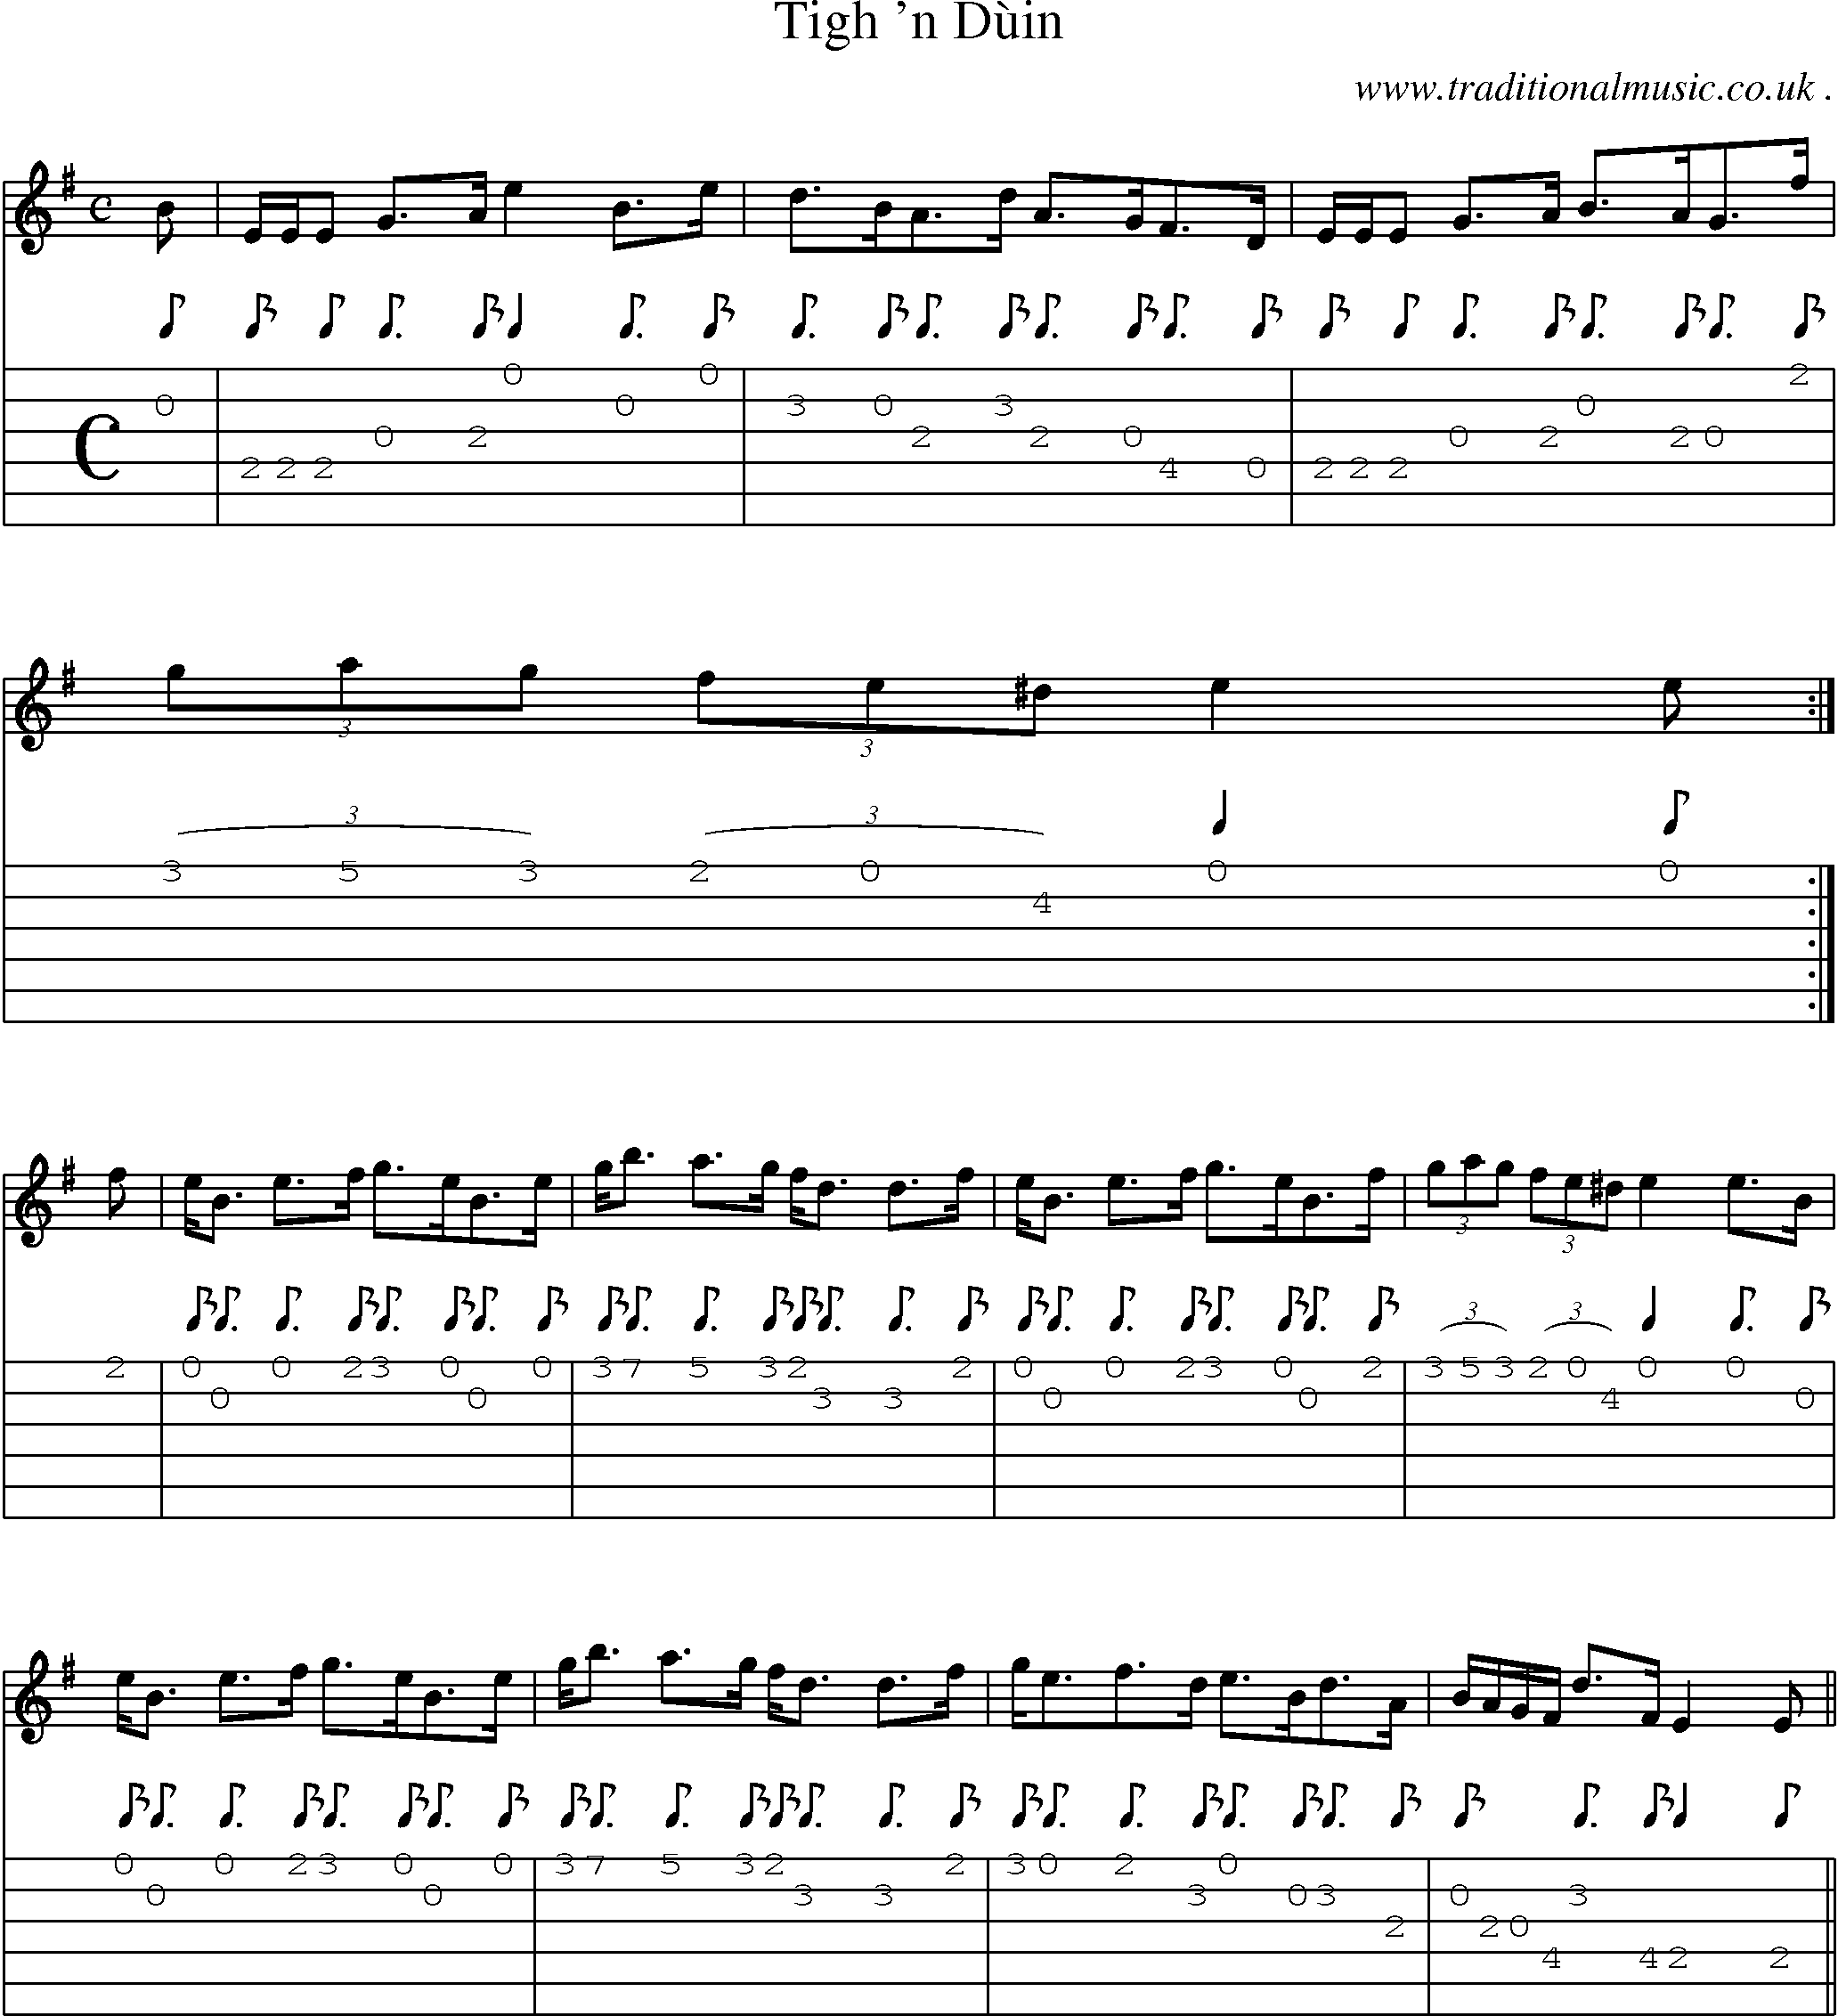 Sheet-music  score, Chords and Guitar Tabs for Tigh N Duin